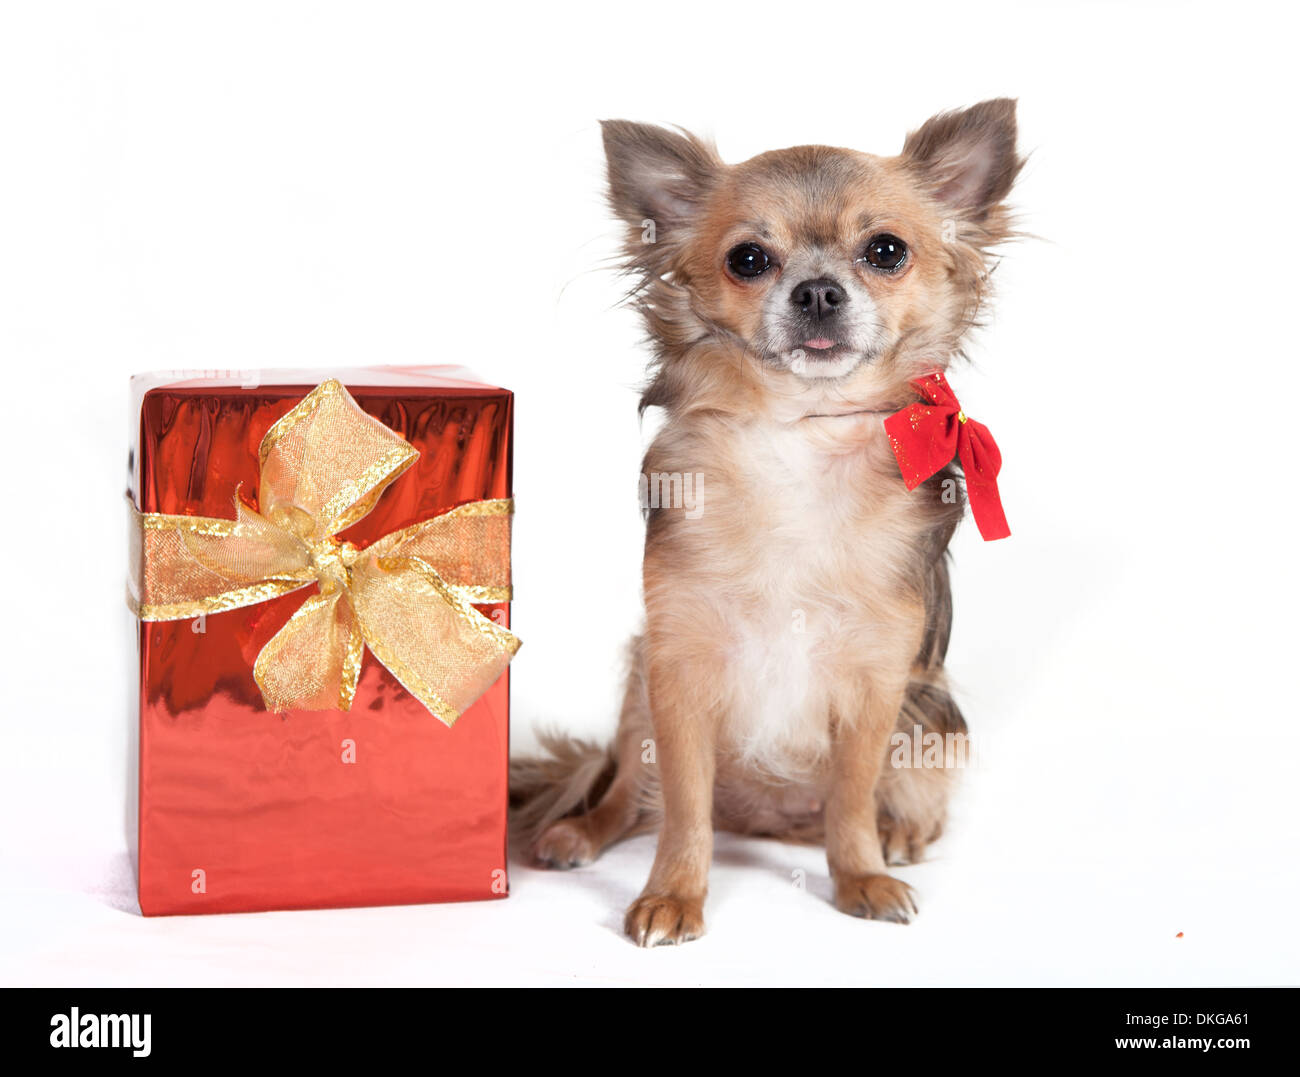 chihuahua dog with Christmas gift, background white Stock Photo